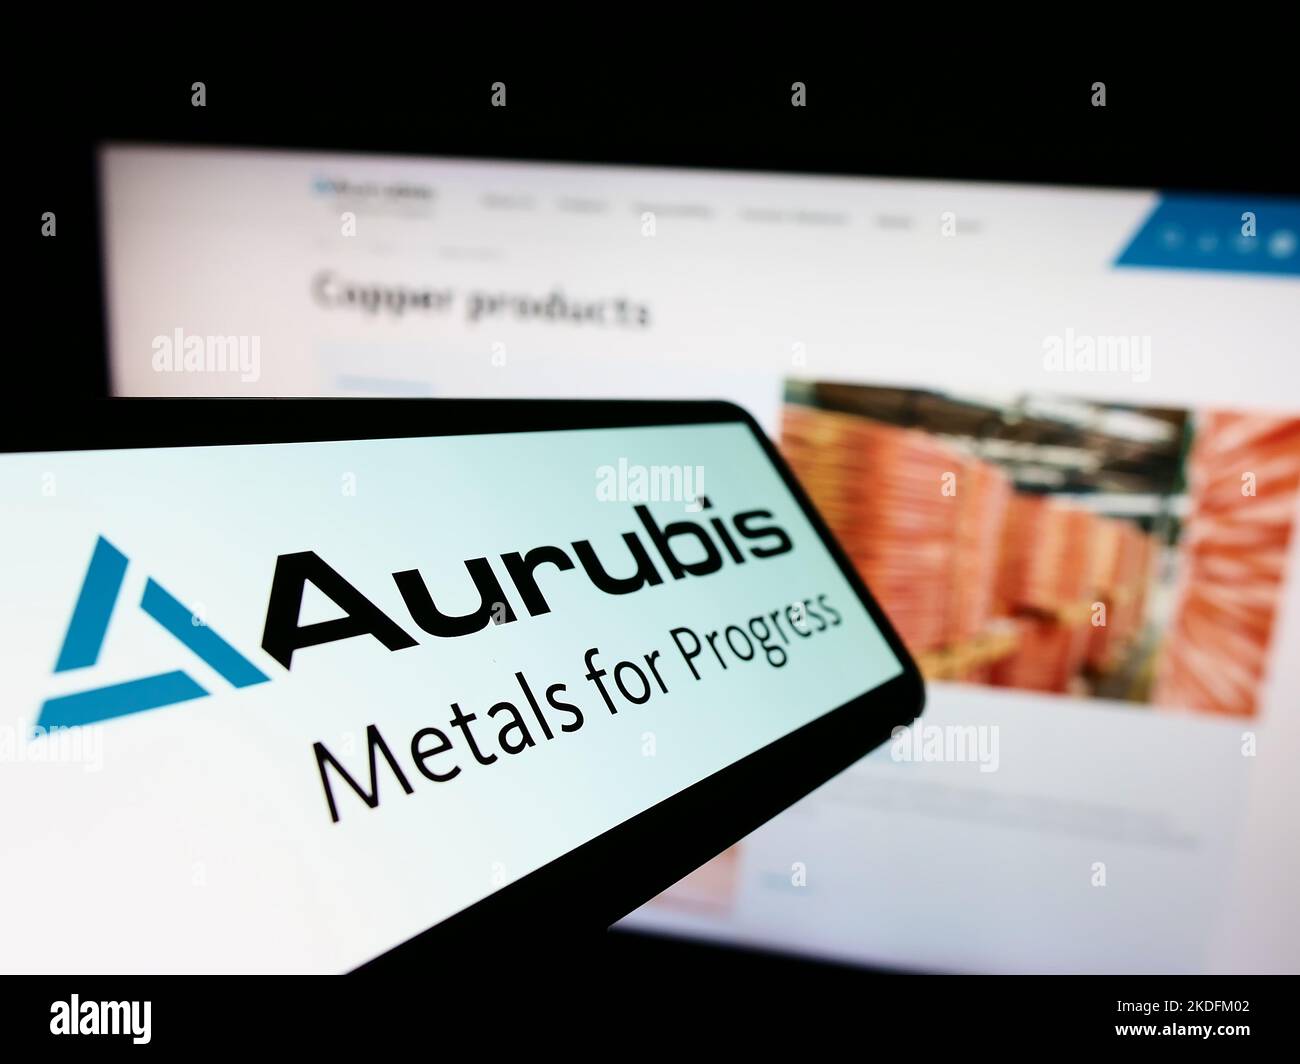 Mobile phone with logo of German copper company Aurubis AG on screen in front of business website. Focus on center-left of phone display. Stock Photo